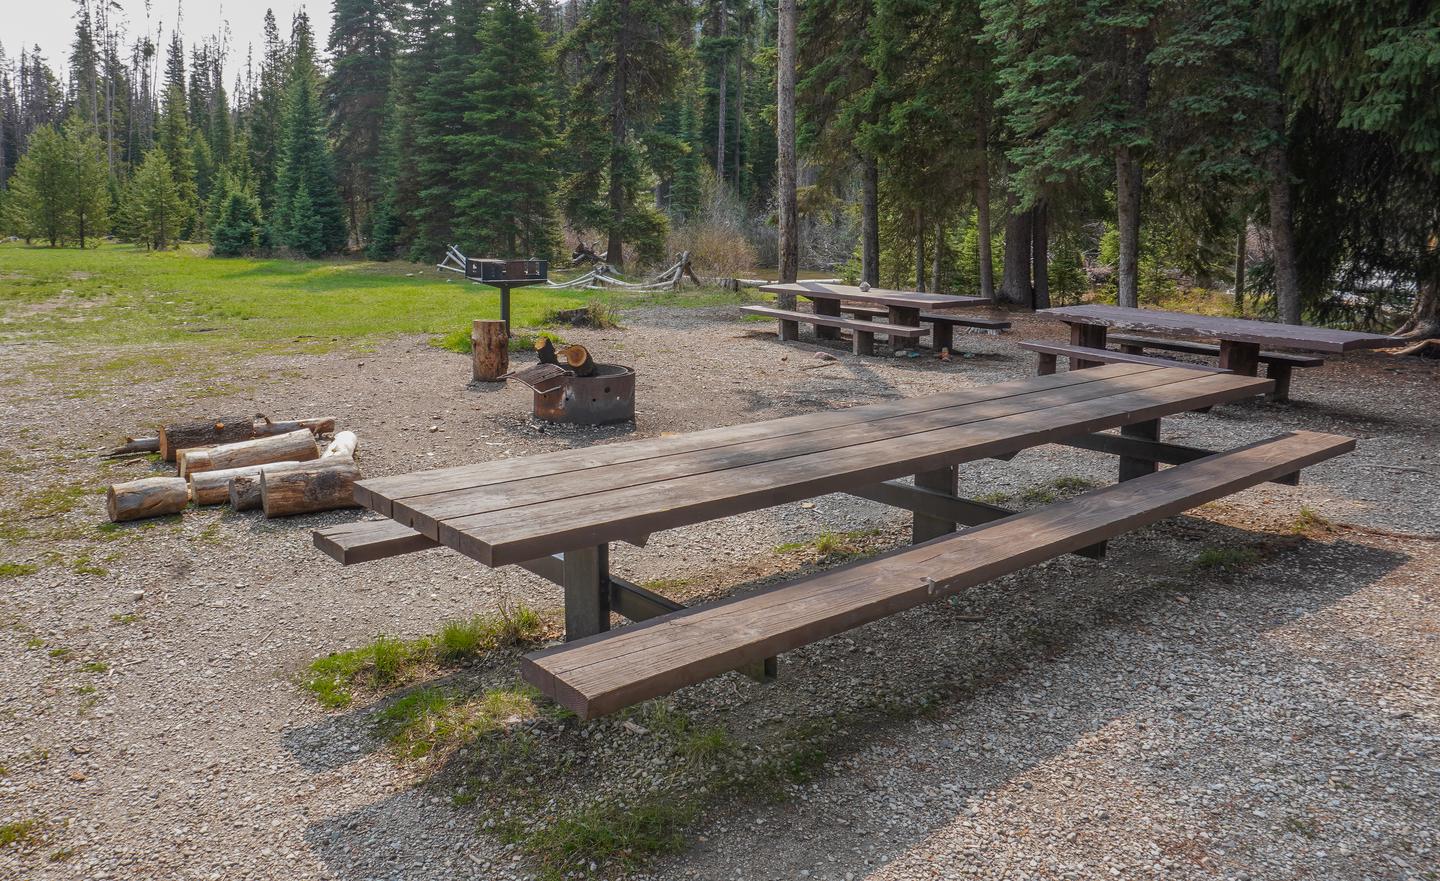 Fales Flat Campground Overview PictureView of group picnic tables, fire ring, and grill